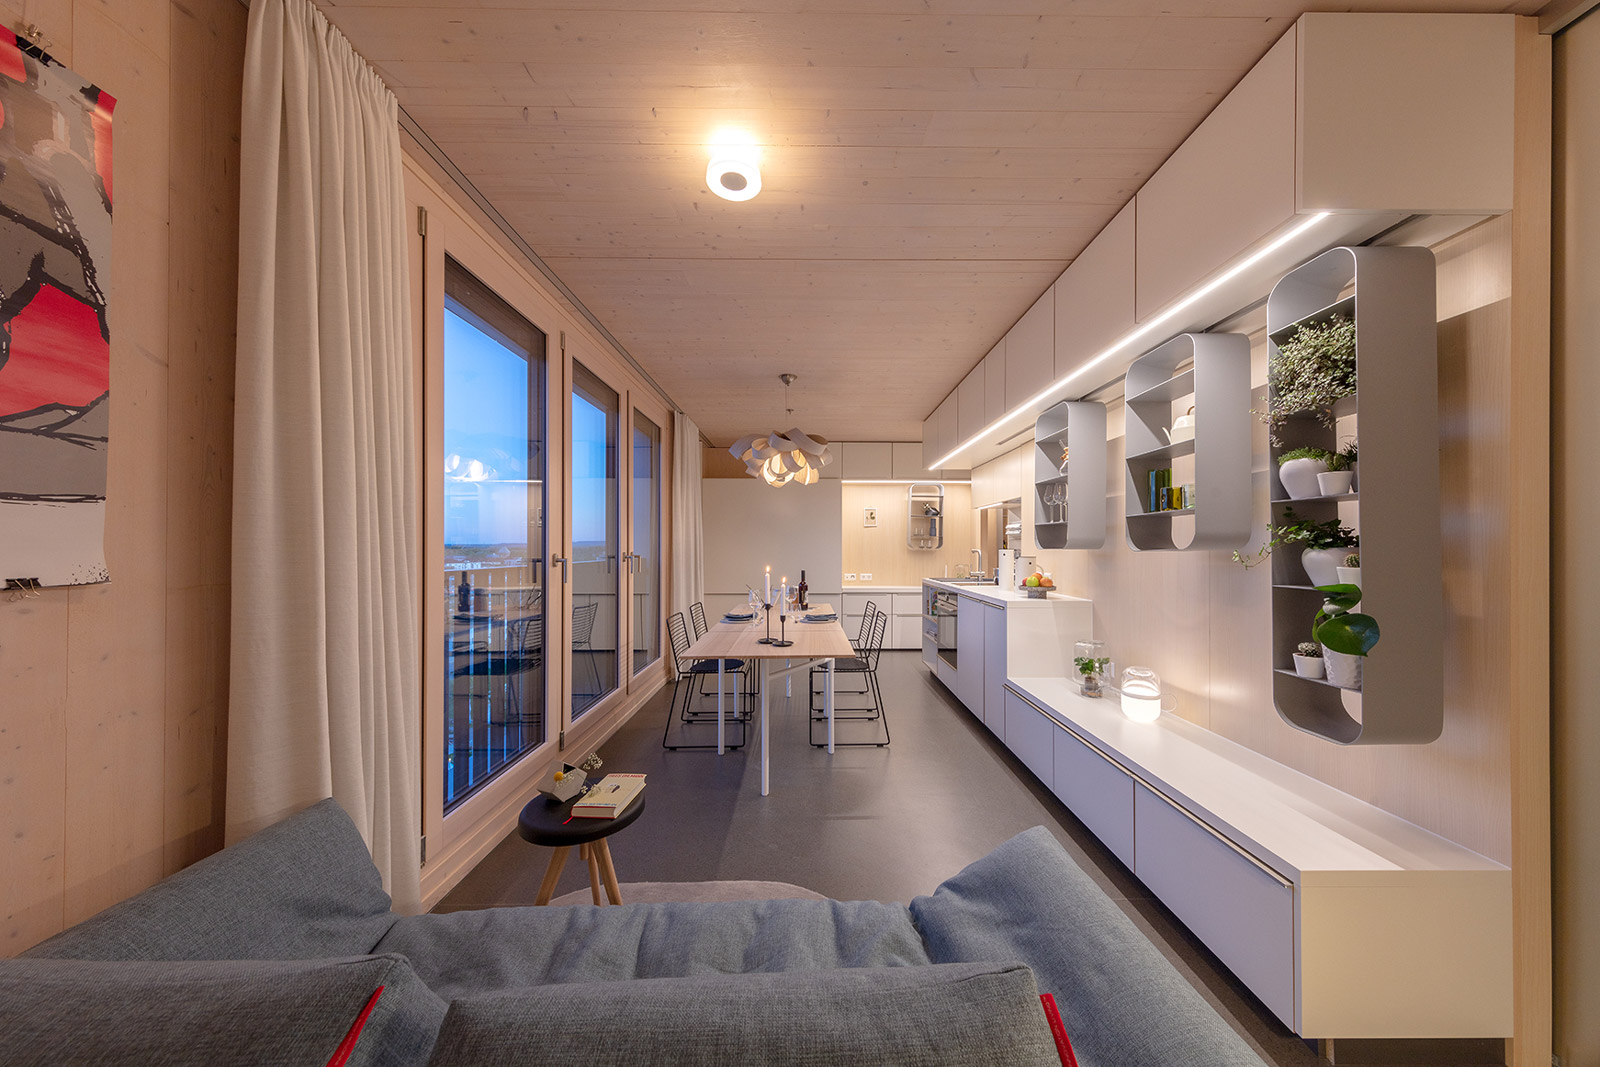 Skaiopartment Micro Living In Germany S First Wooden High Rise